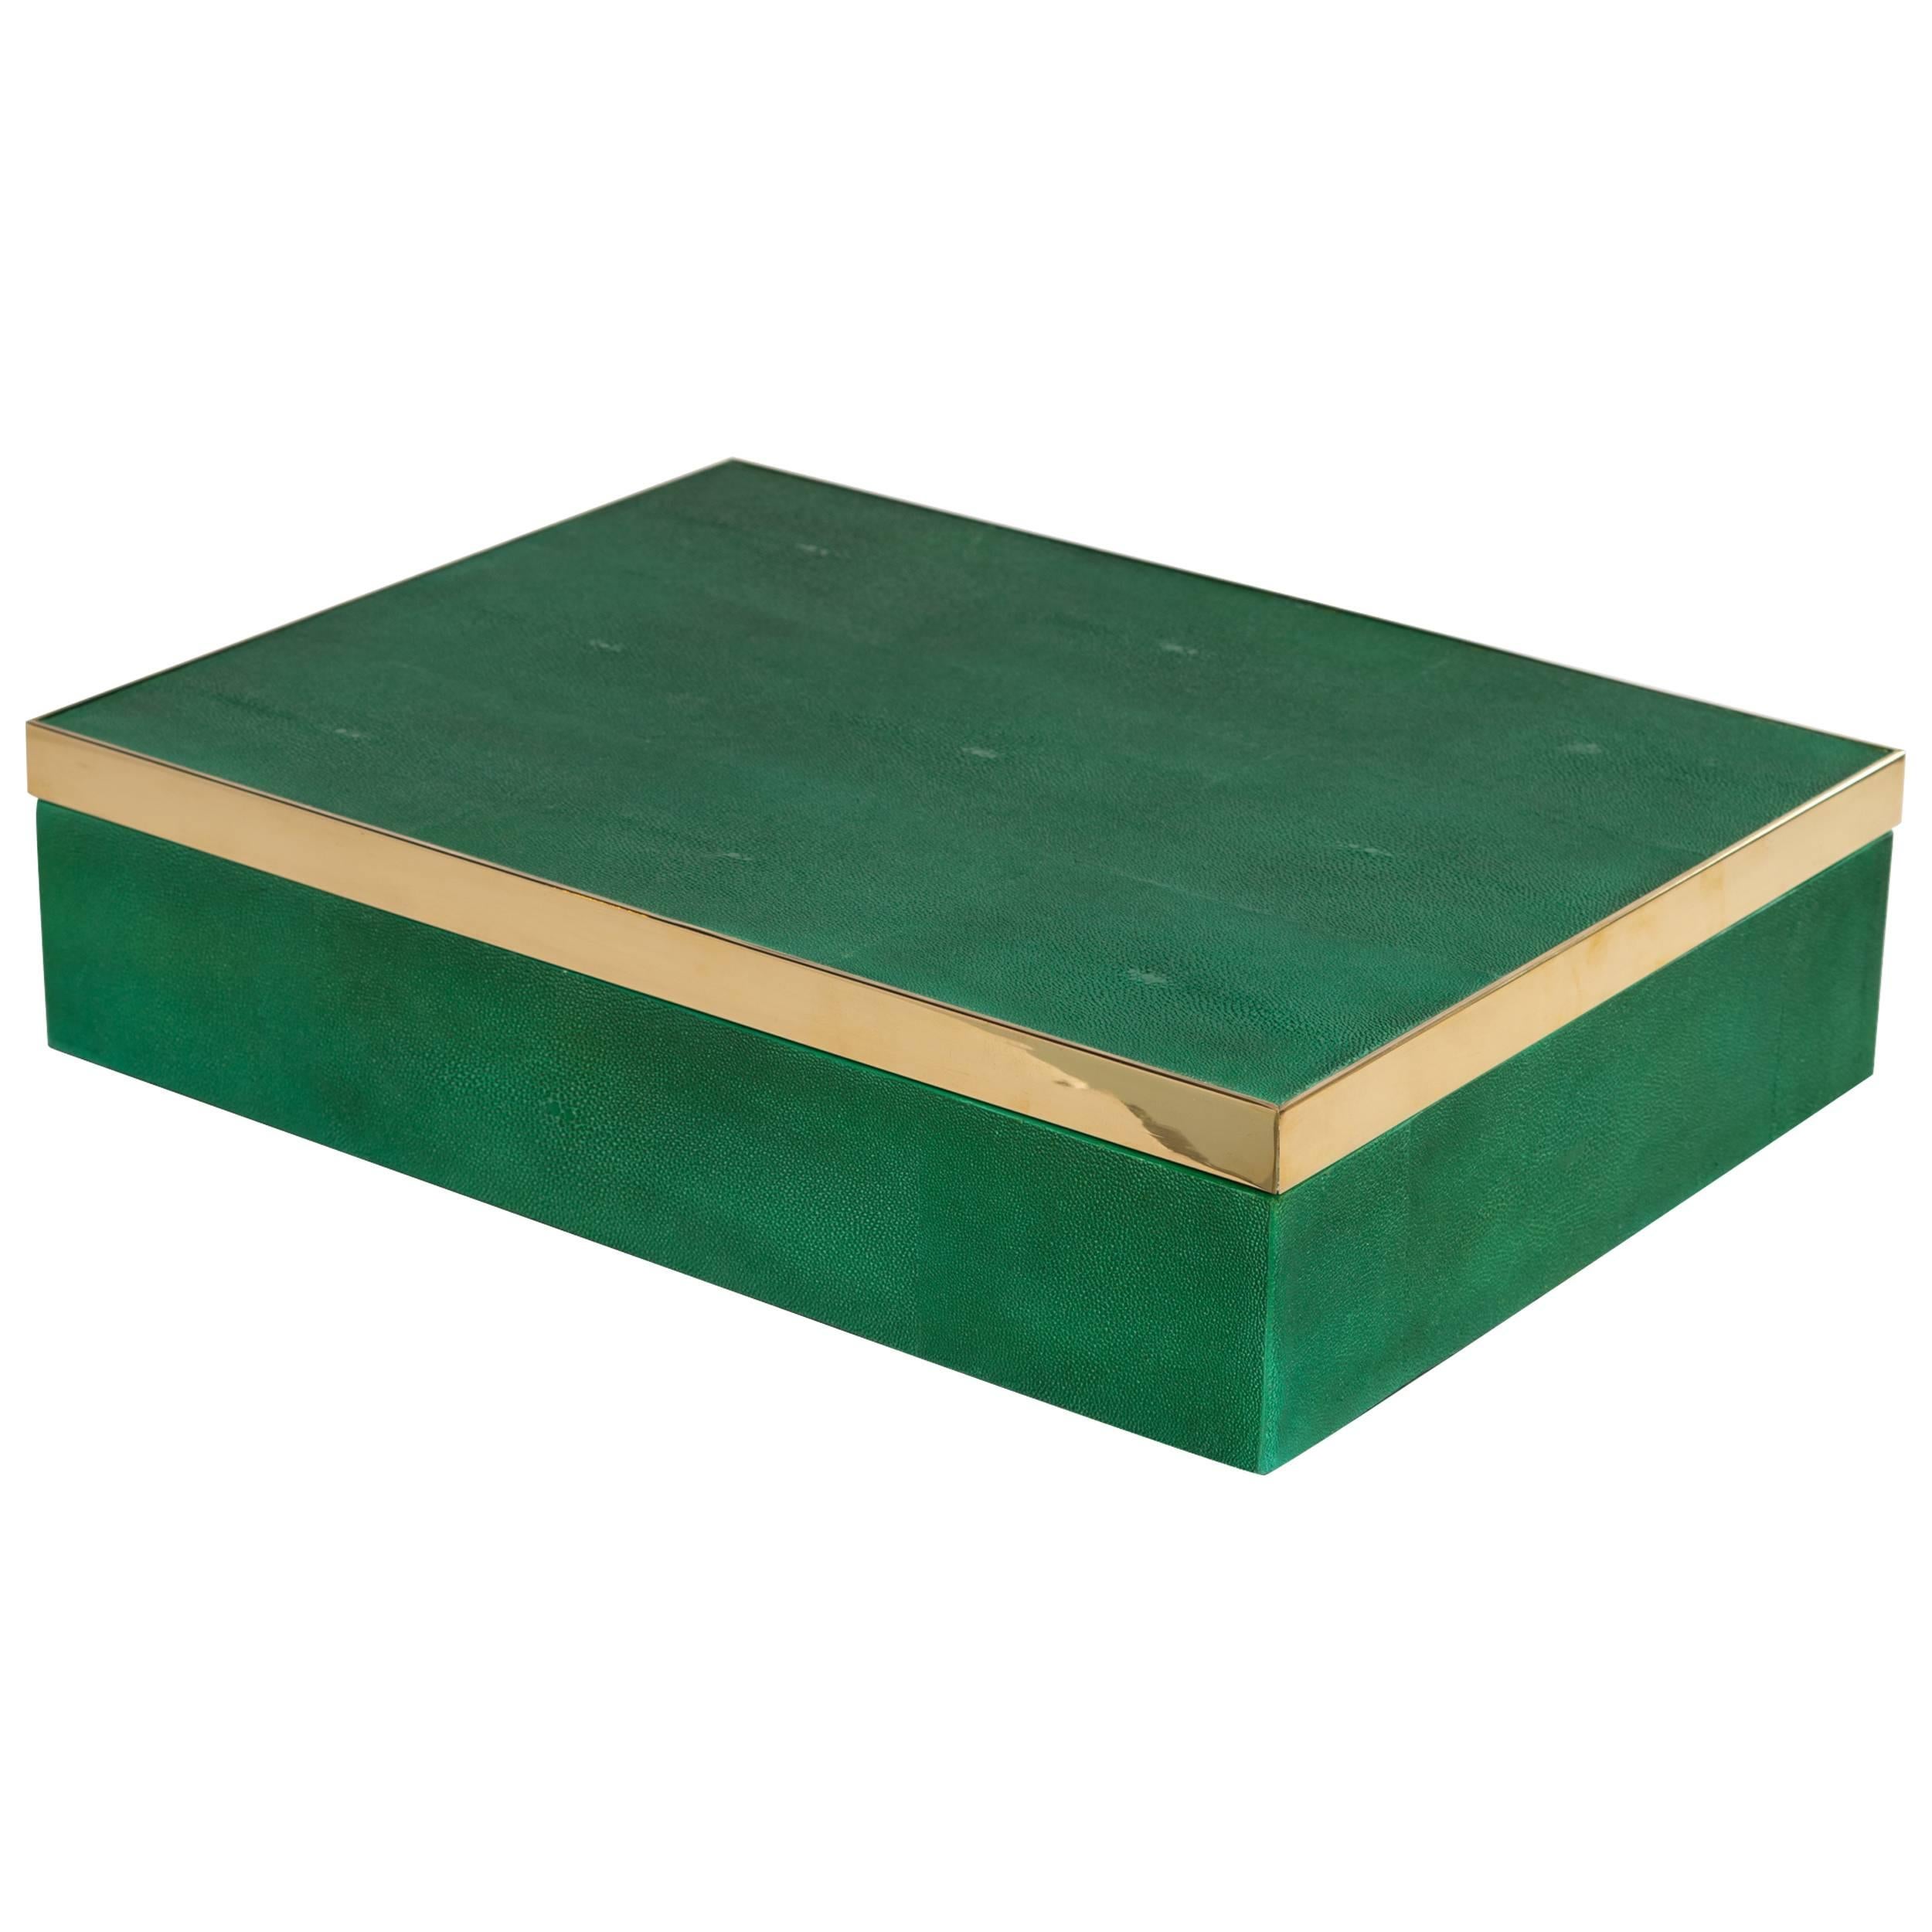 Exquisite hand-crafted luxury box in hand dyed emerald green stingray. The box has an extra large rectangular form with brass banded accent along the lid. Lined with black velvet felt interior.